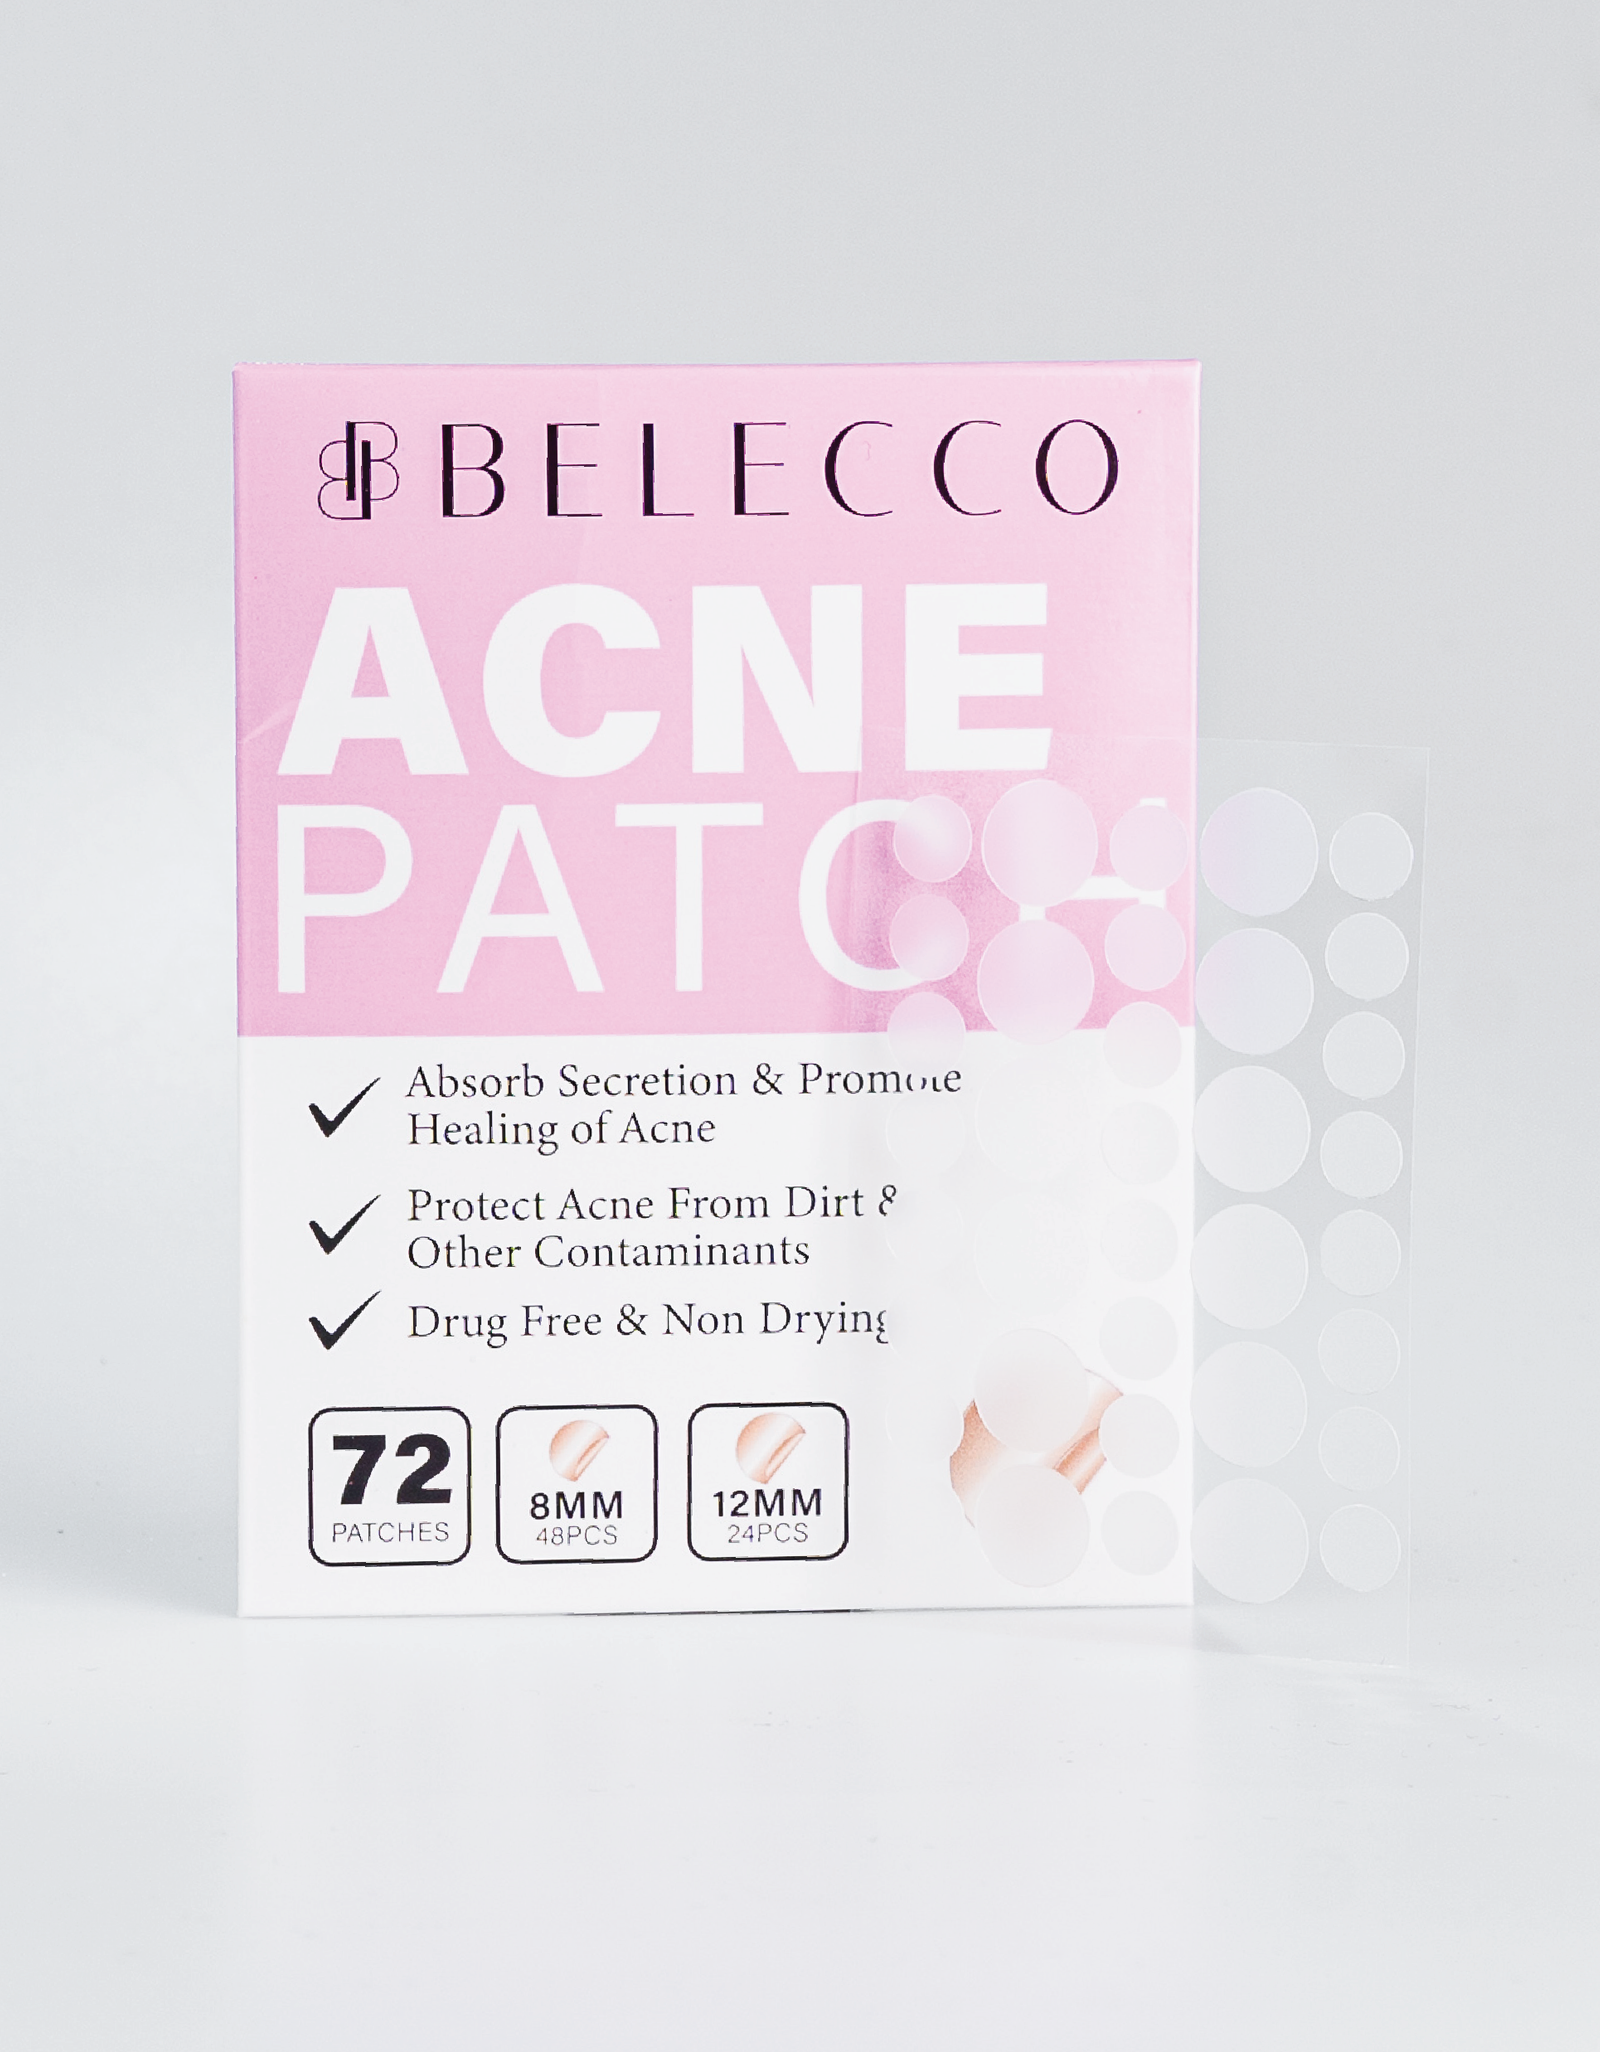 Belecco Acne Patch